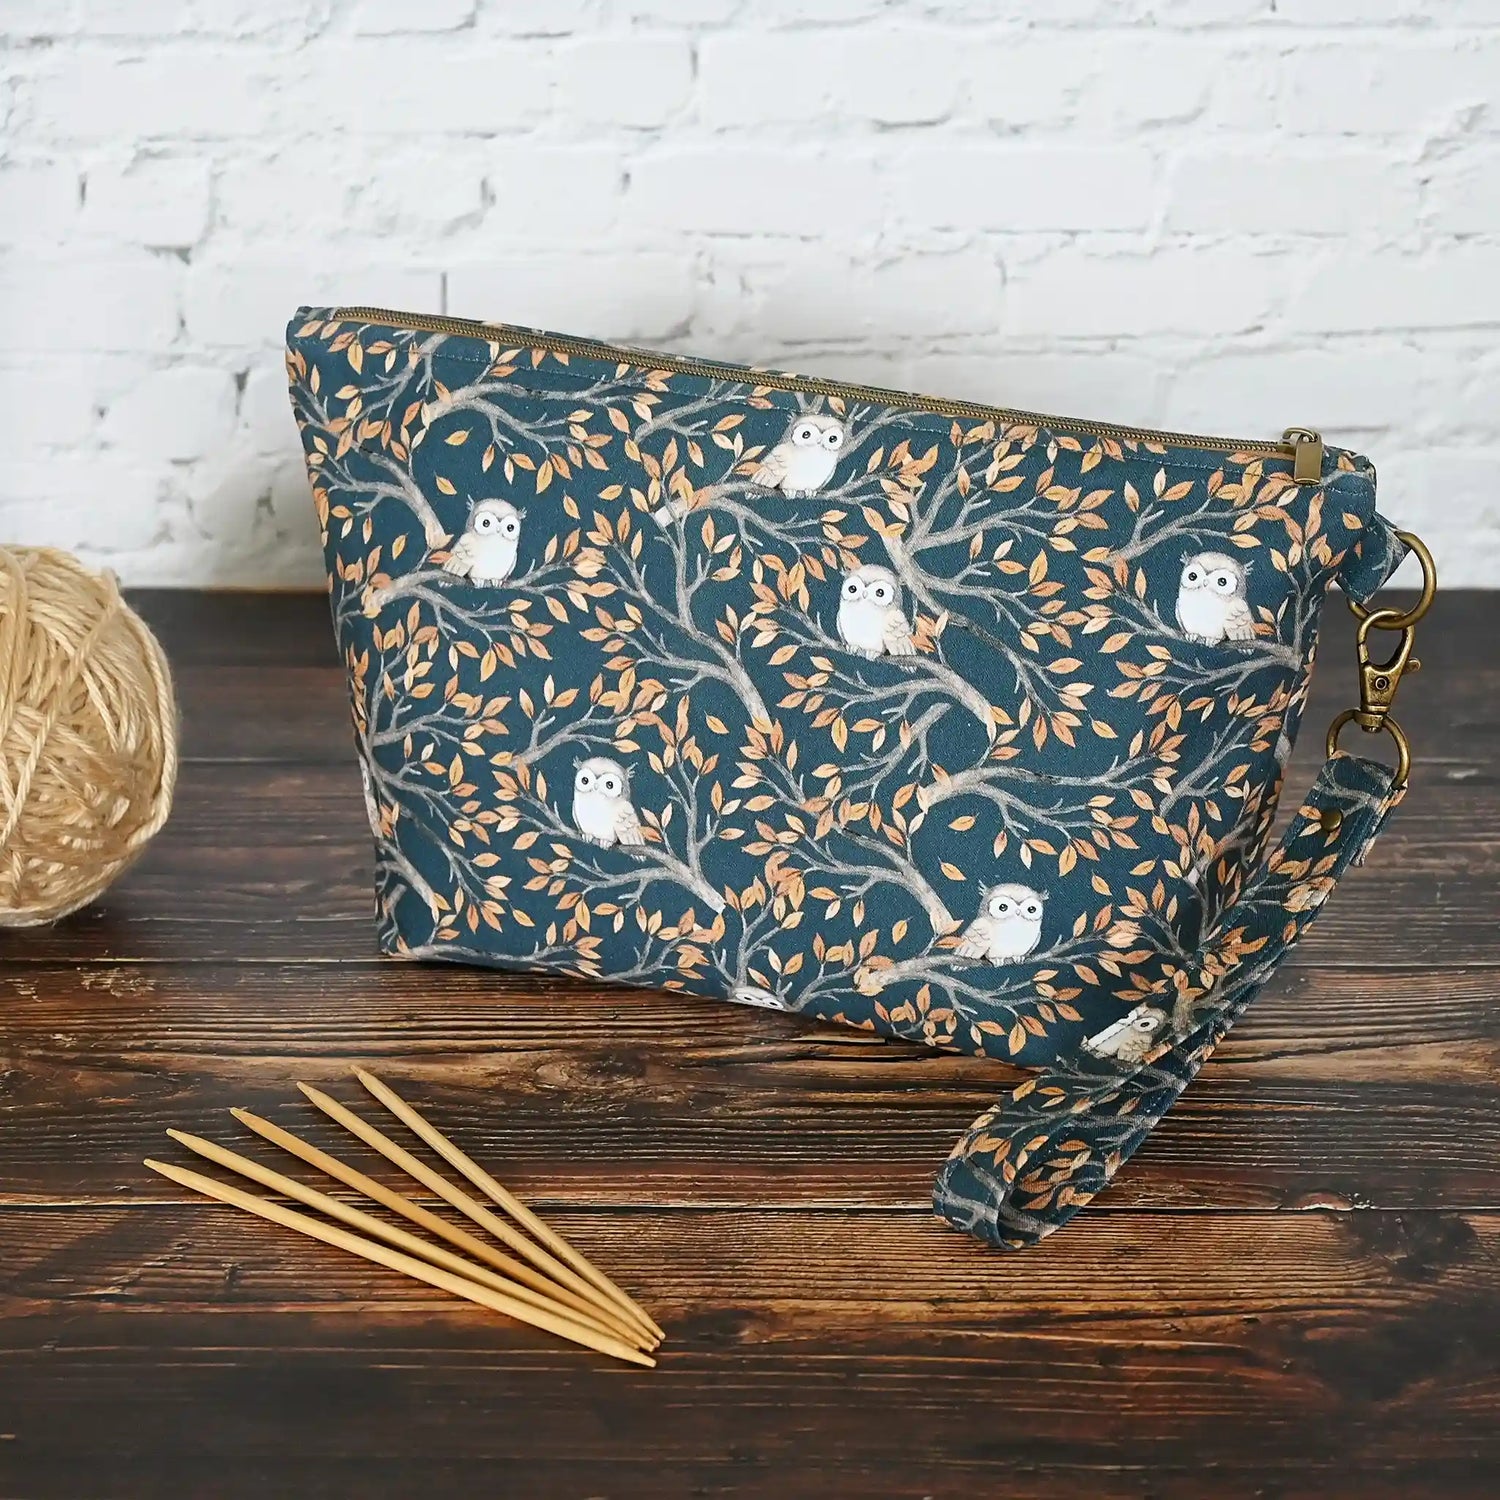 Zippered pouch in an adorable navy owl print.  Made in Canada by Yellow Petal Handmade.